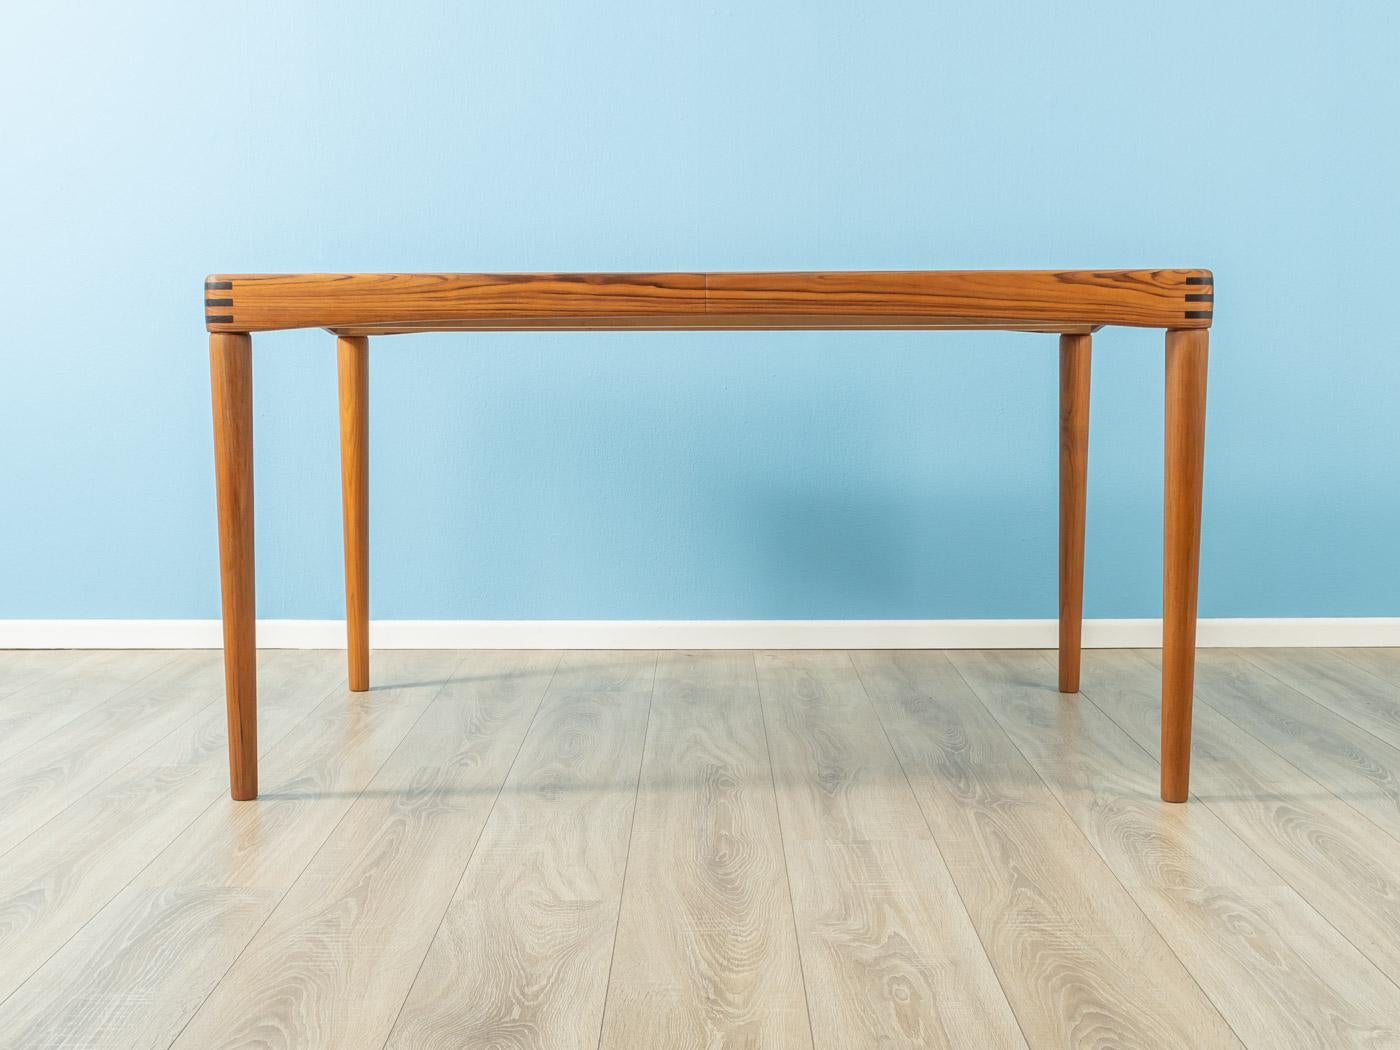 Danish Teak Dining Table from the 1960s Designed by H.W. Klein, Manufactured by Bramin 